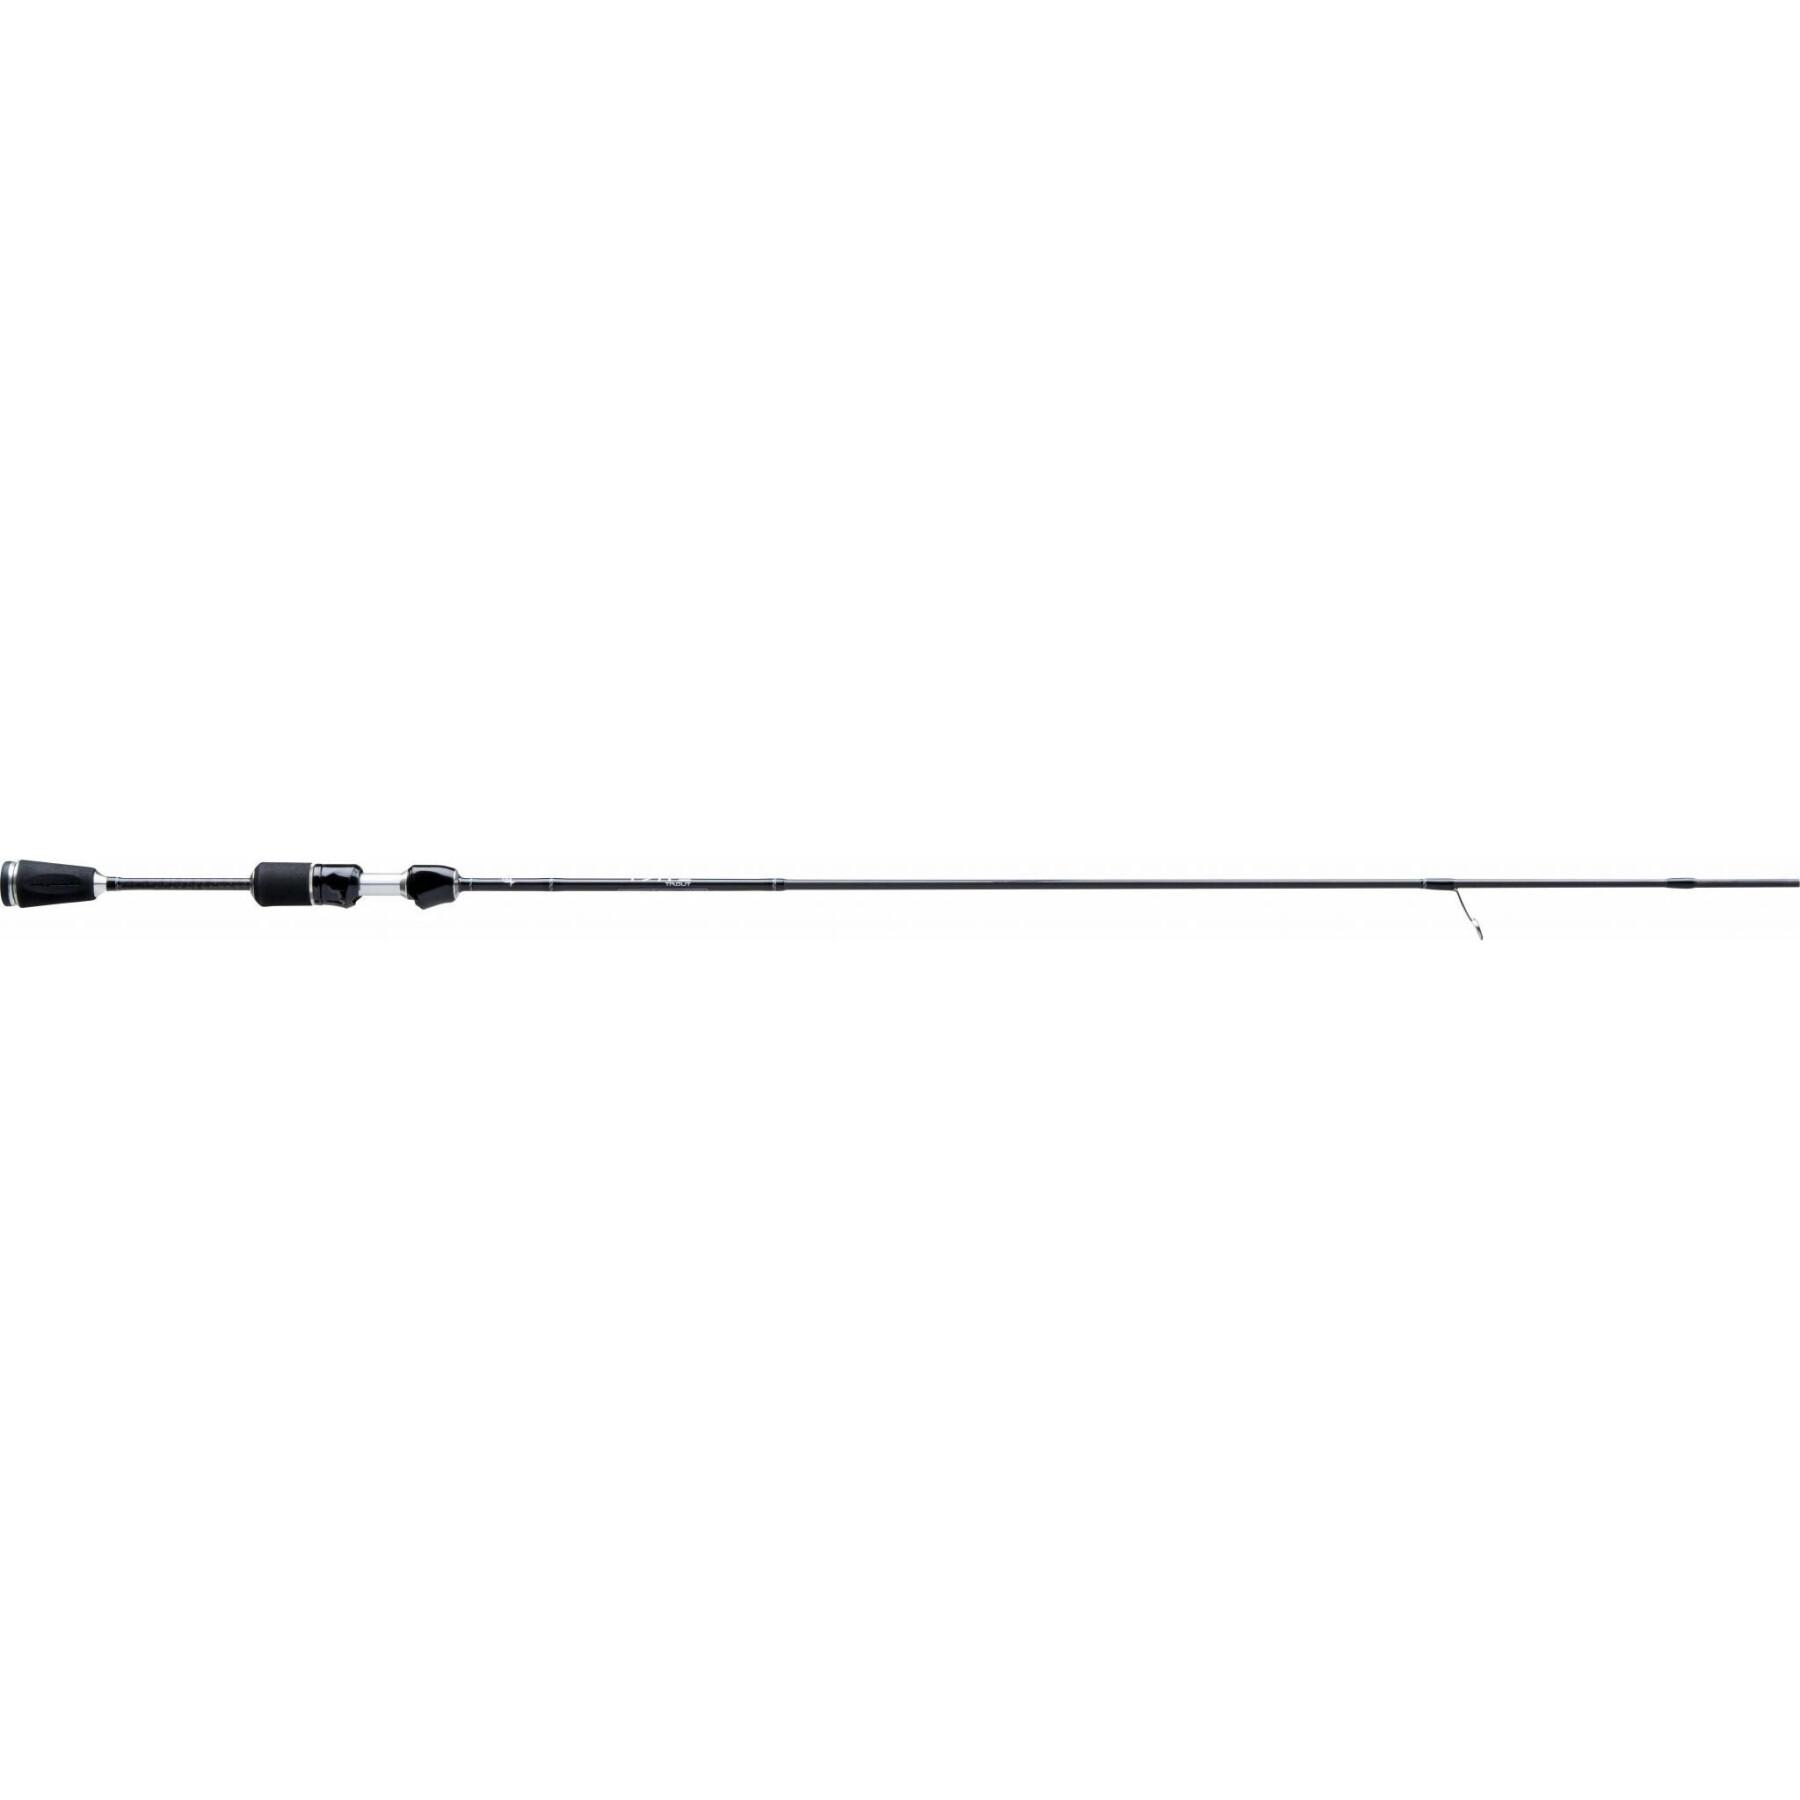 Caña 13 Fishing Fate Trout sp 1,92m 0,5-3,5g